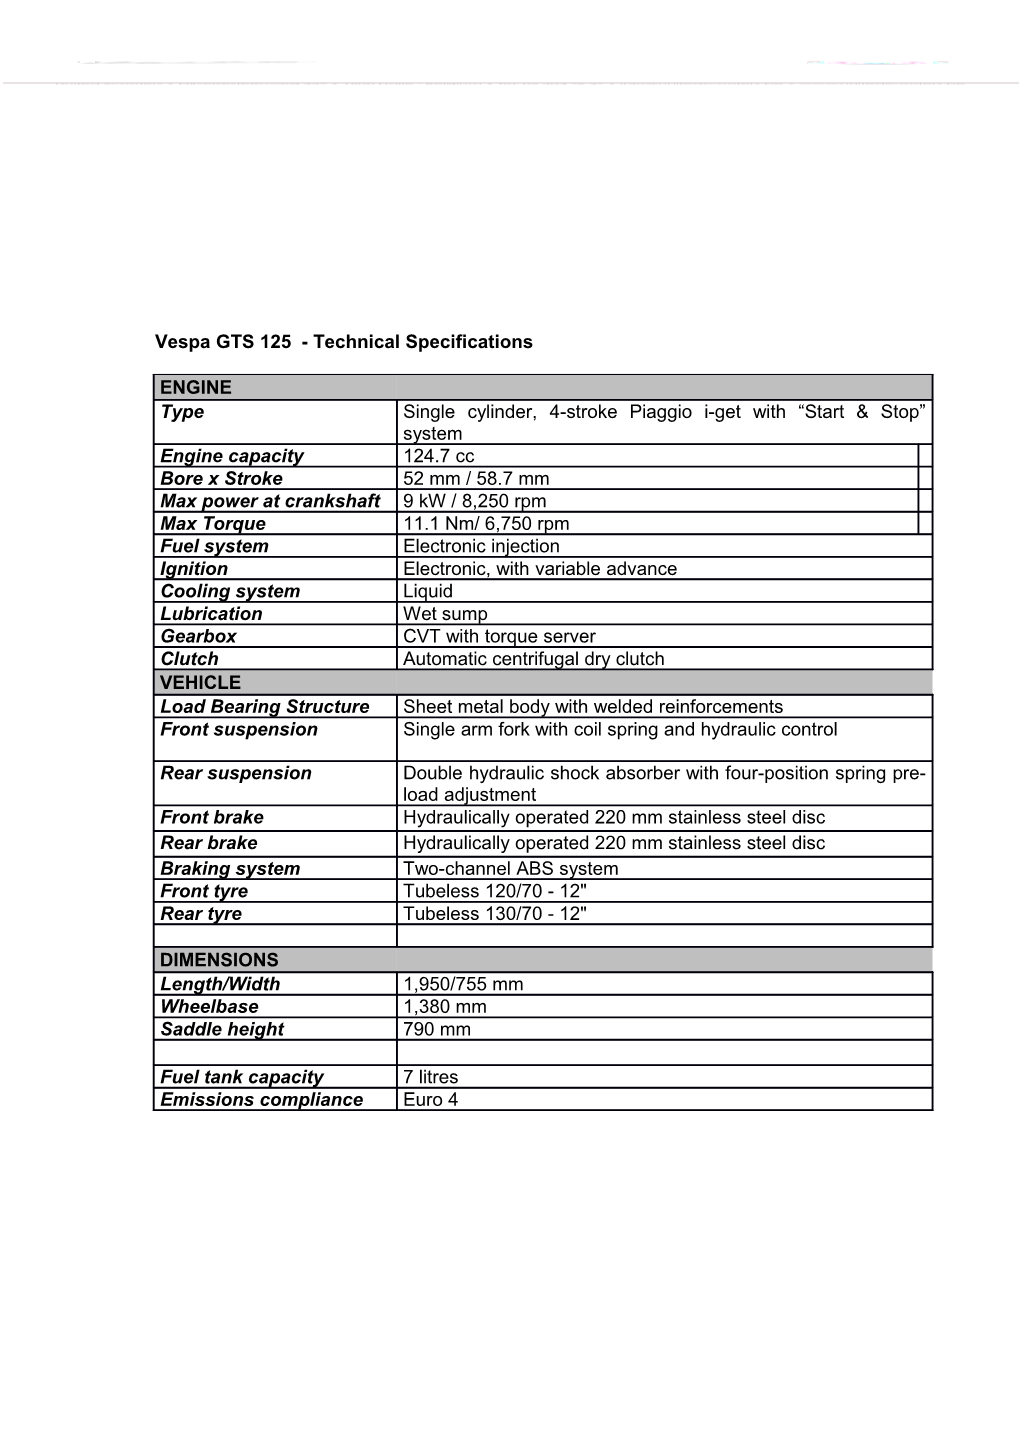 Vespa GTS 125 - Technical Specifications